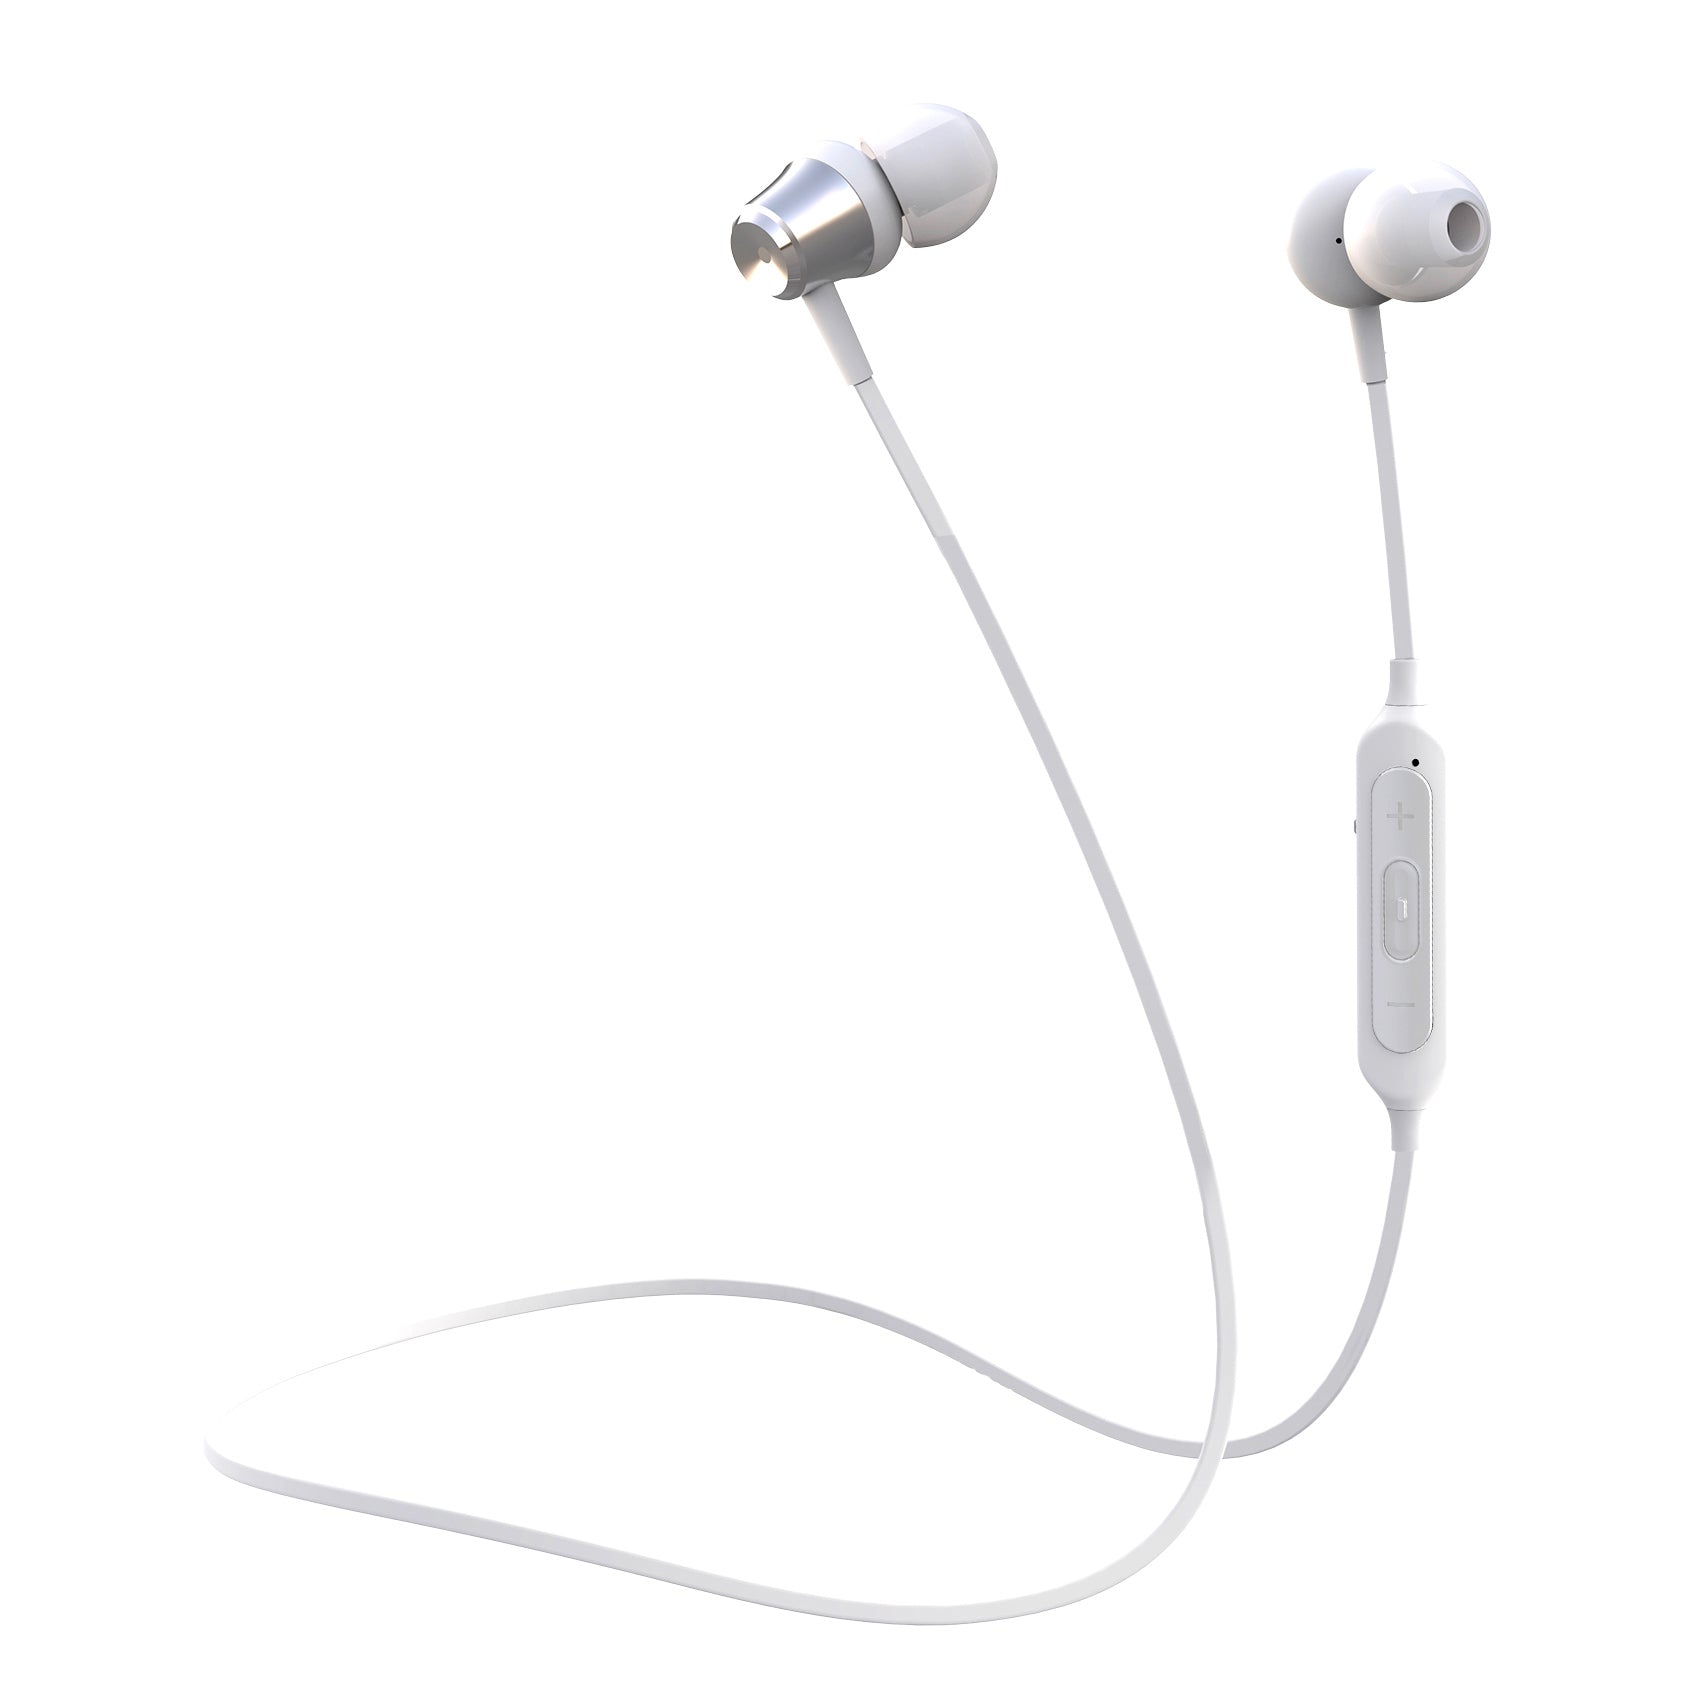 Celly BHSTEREO2 Stereo Bluetooth Earphones White